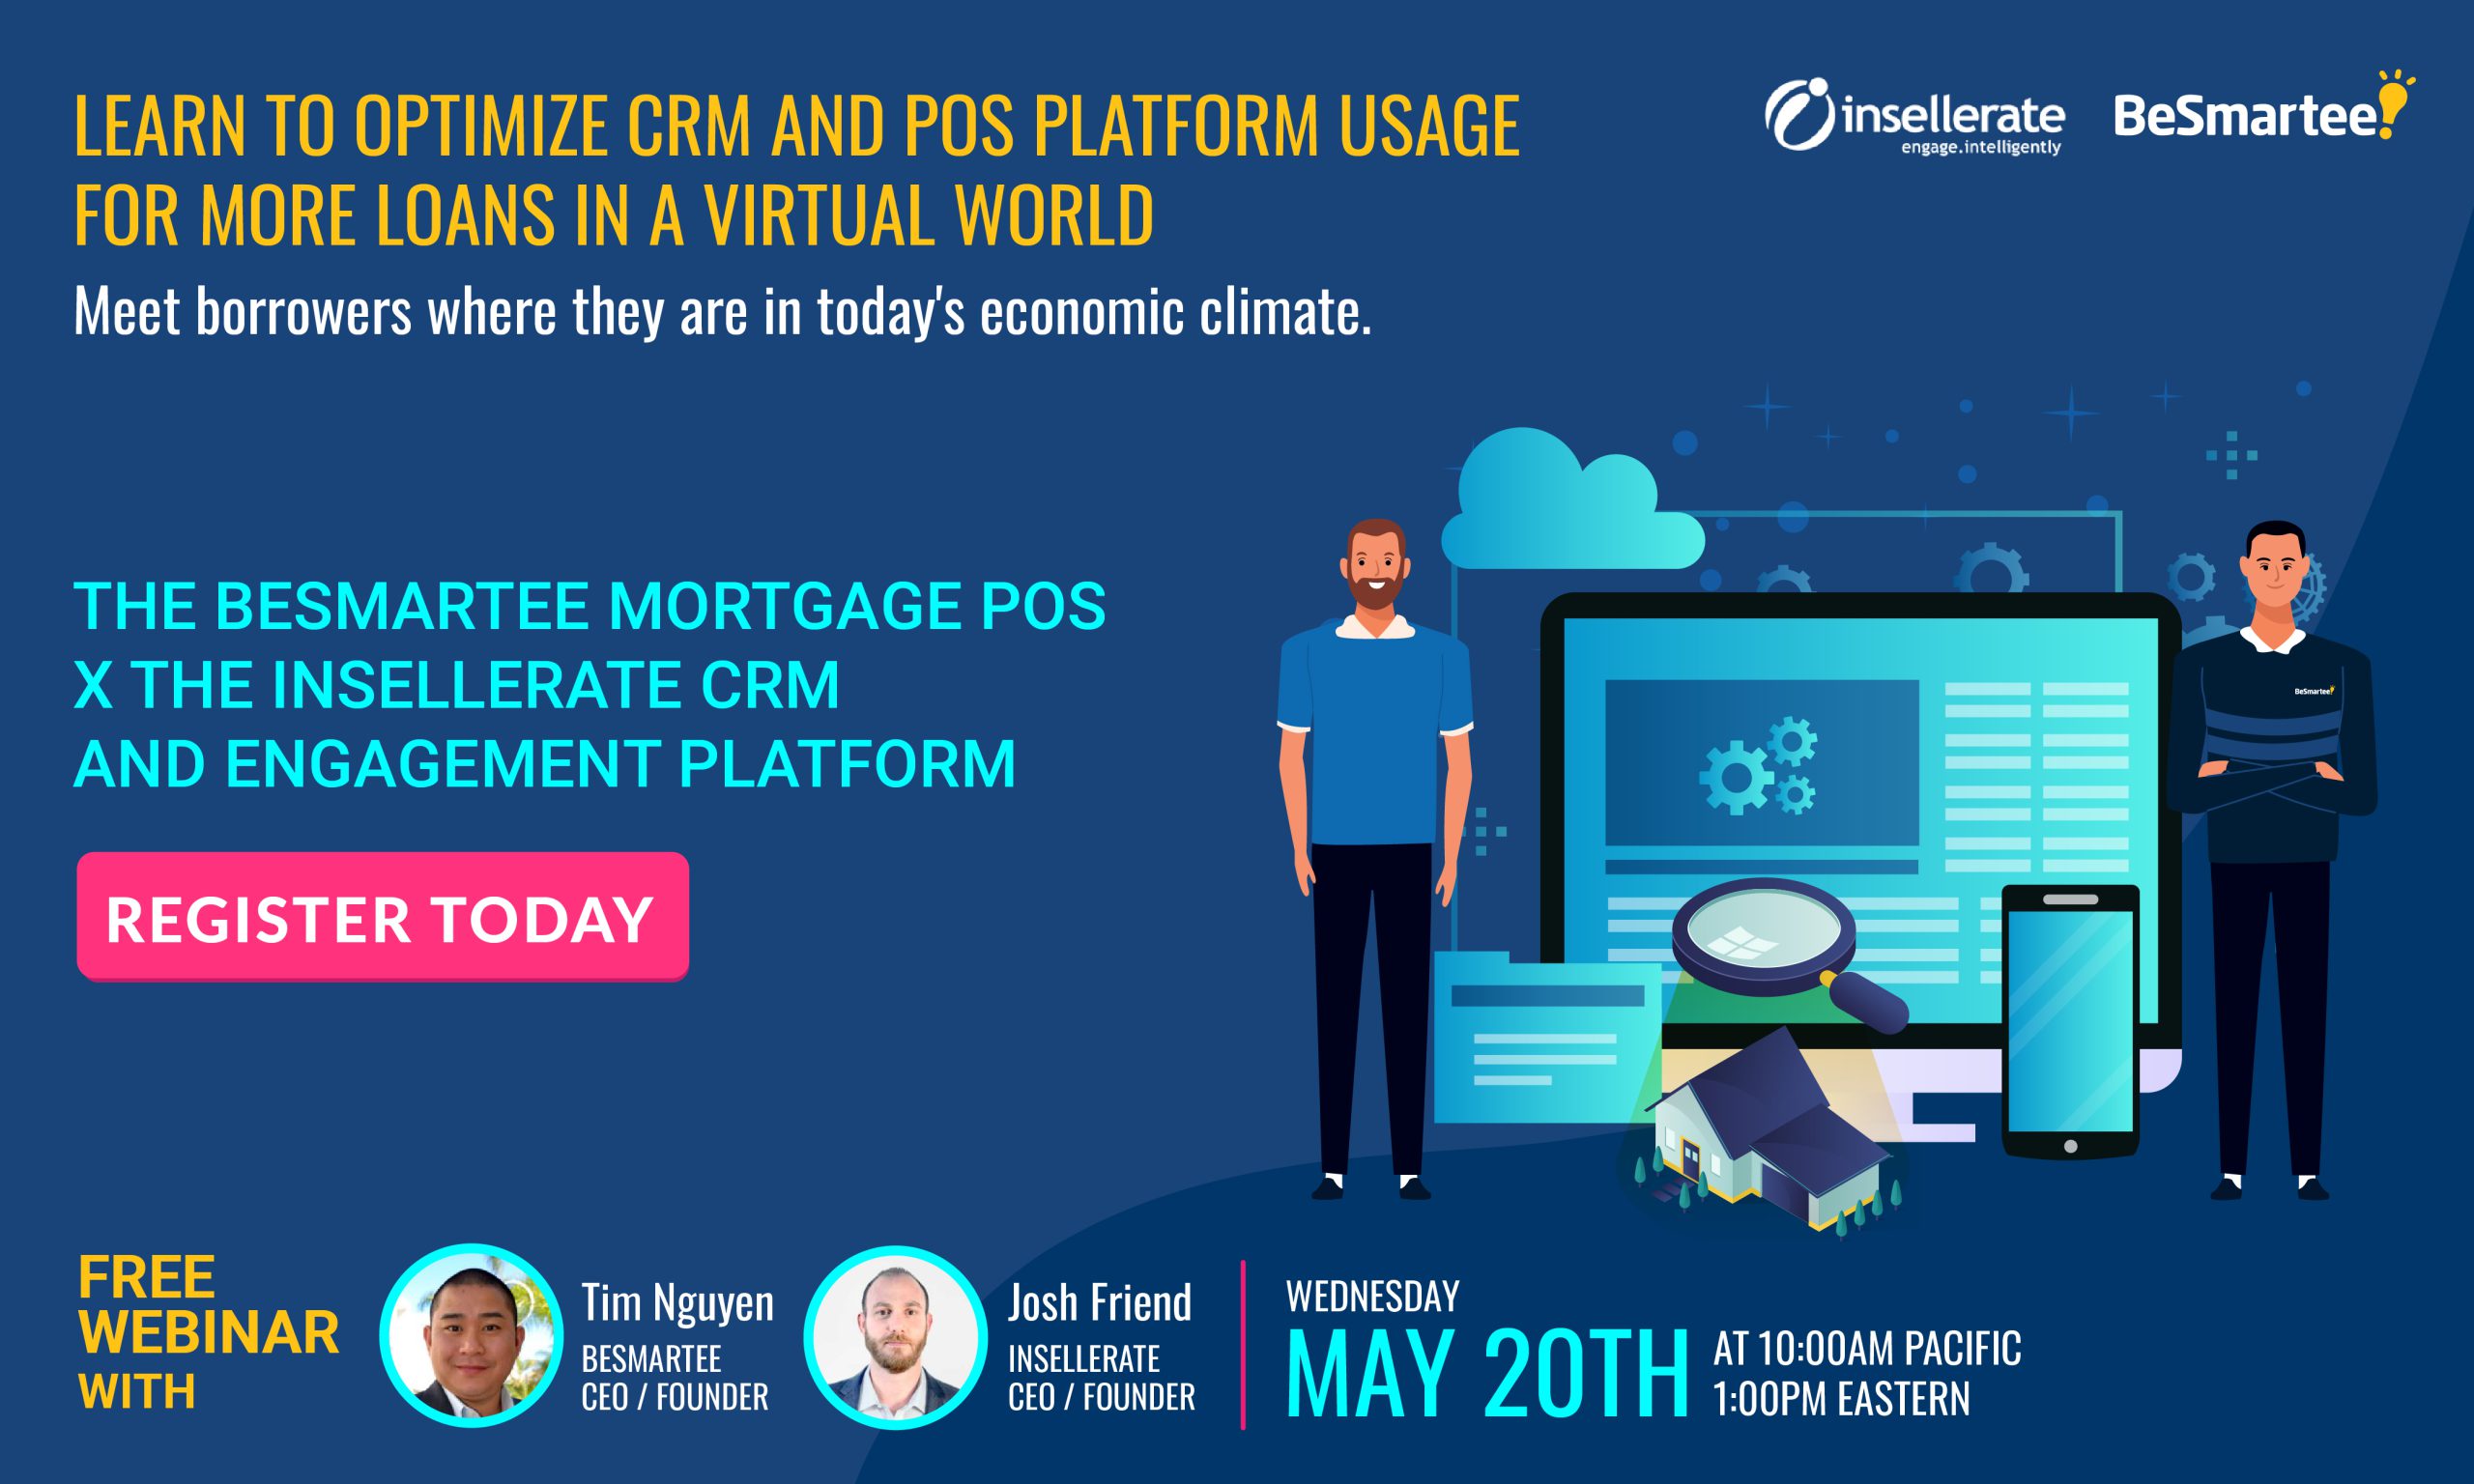 Learn to Optimize CRM & POS Platform Usage for More Loans in a Virtual World